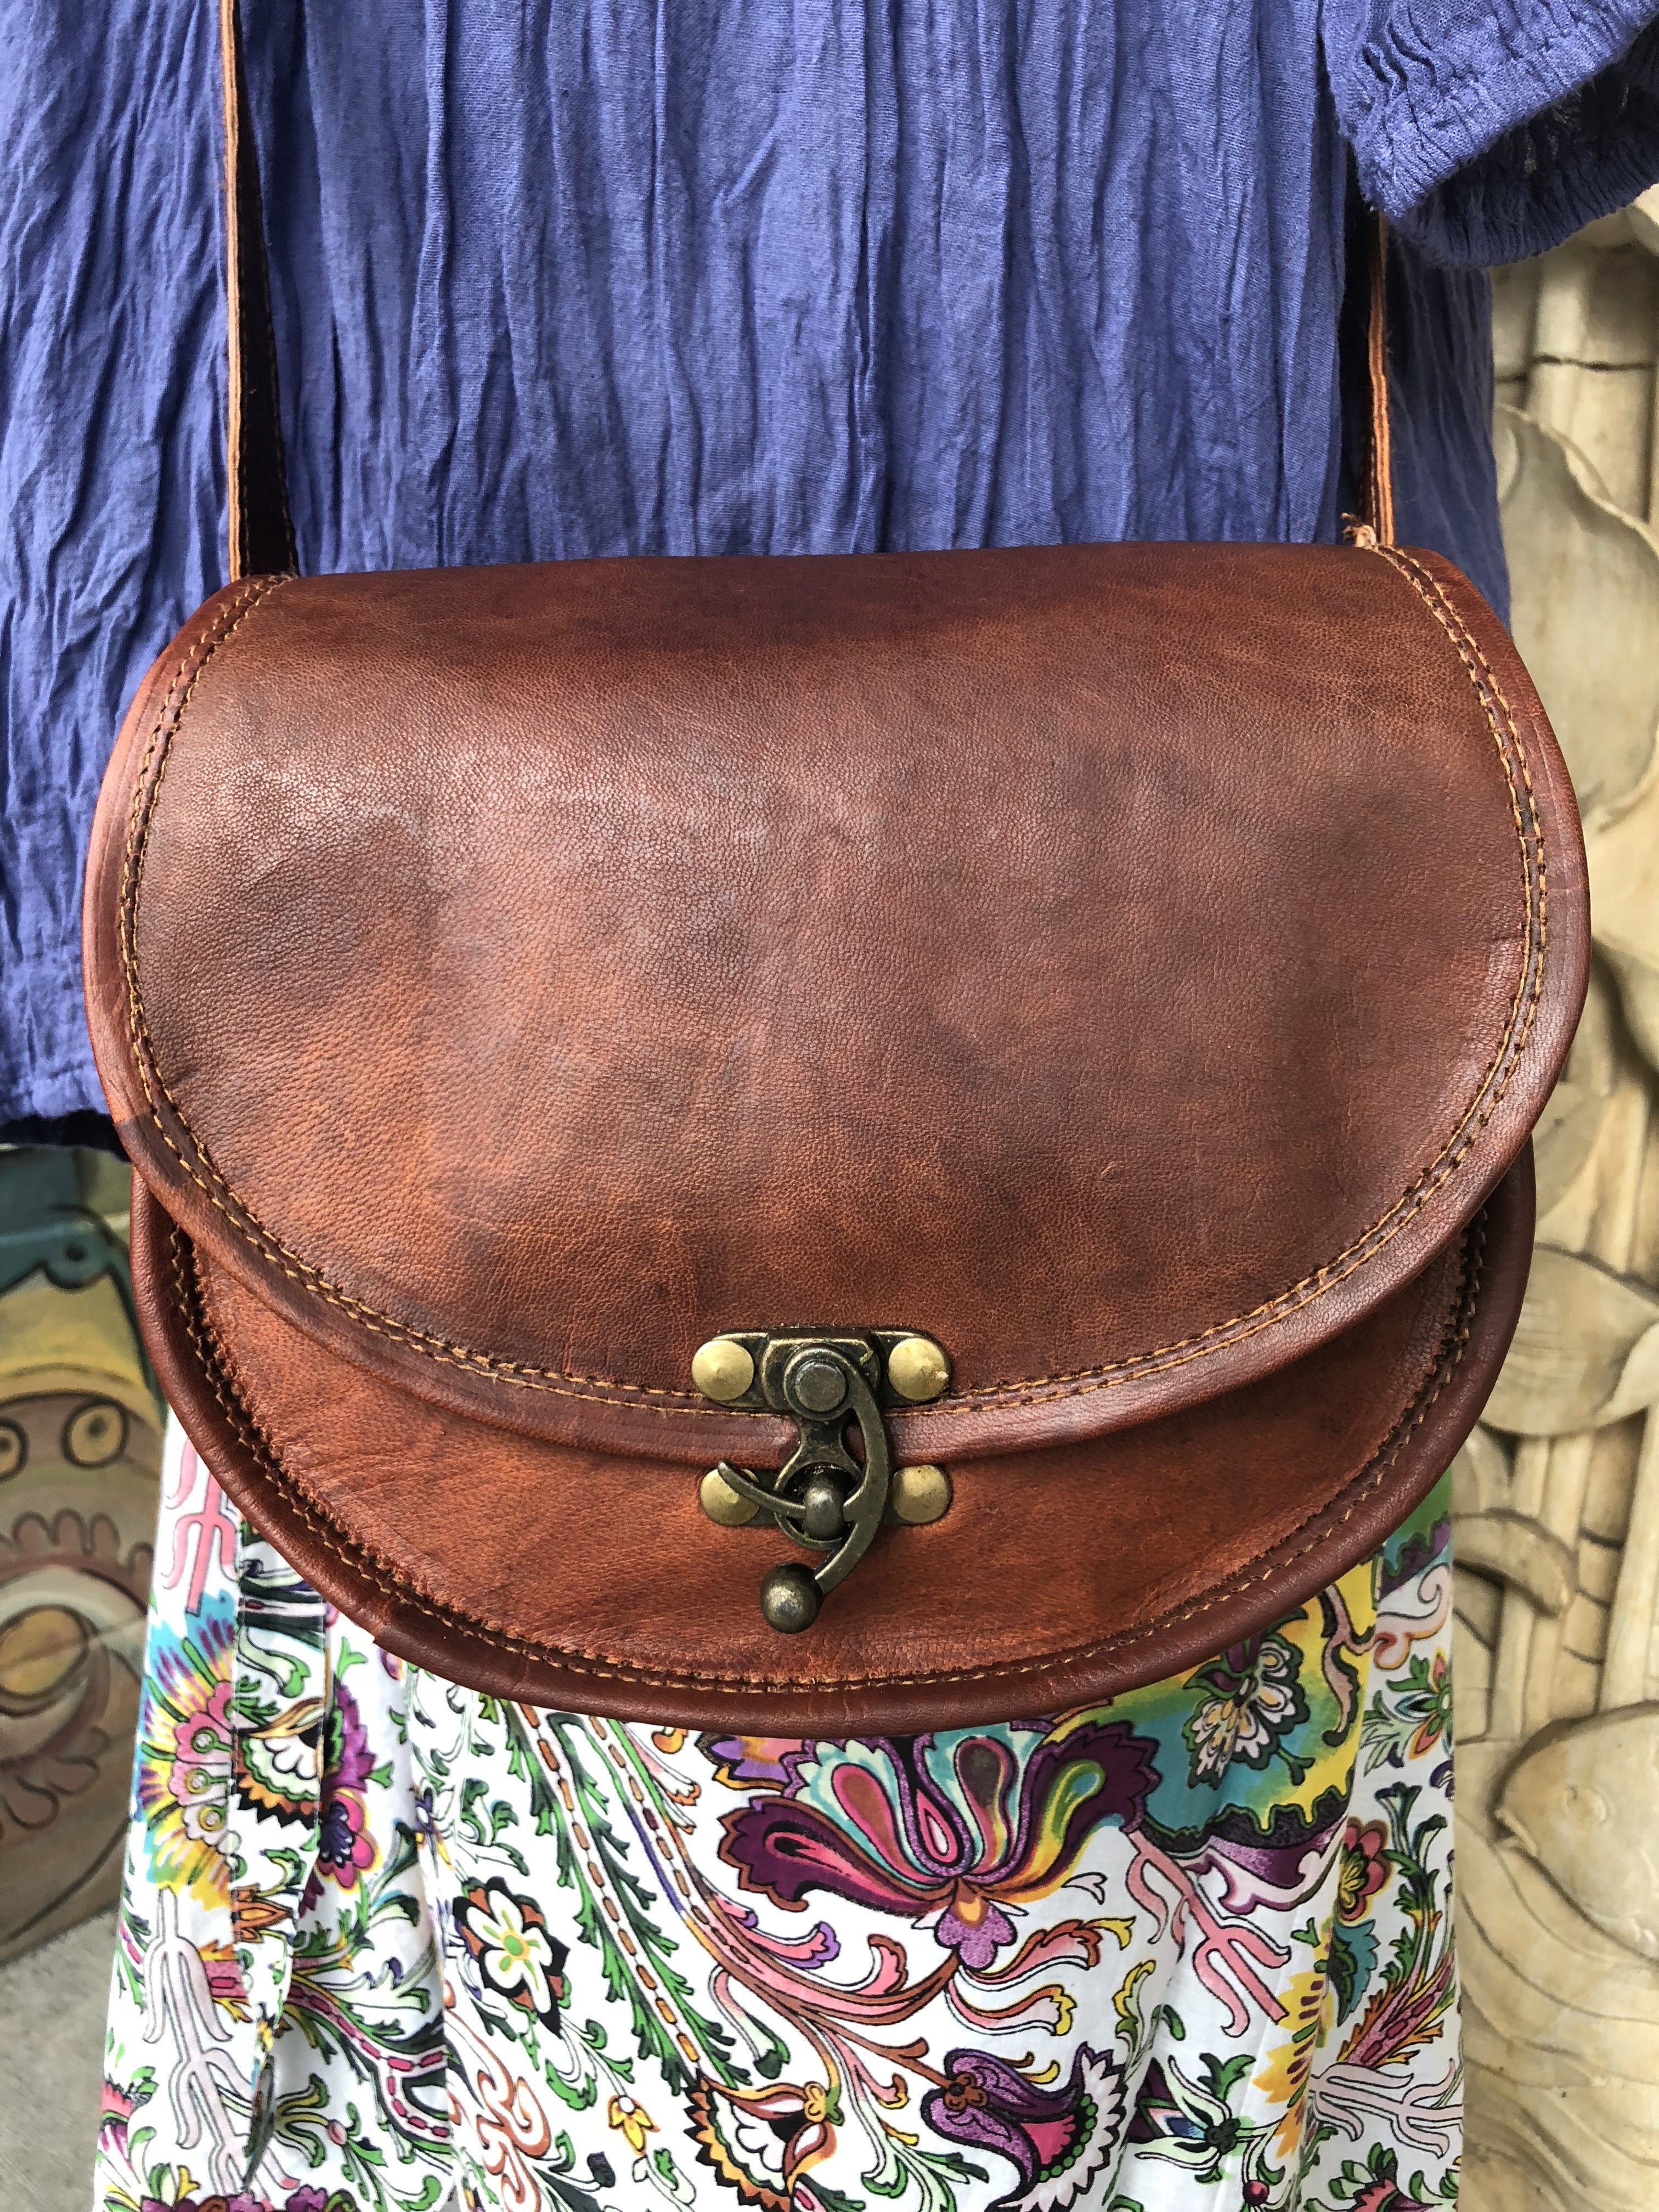 Circle Leather Bag, Cercle, Round Crossbody Purse, Top Handle Circle Purse  - Etsy | Purses crossbody, Circle purse, Leather